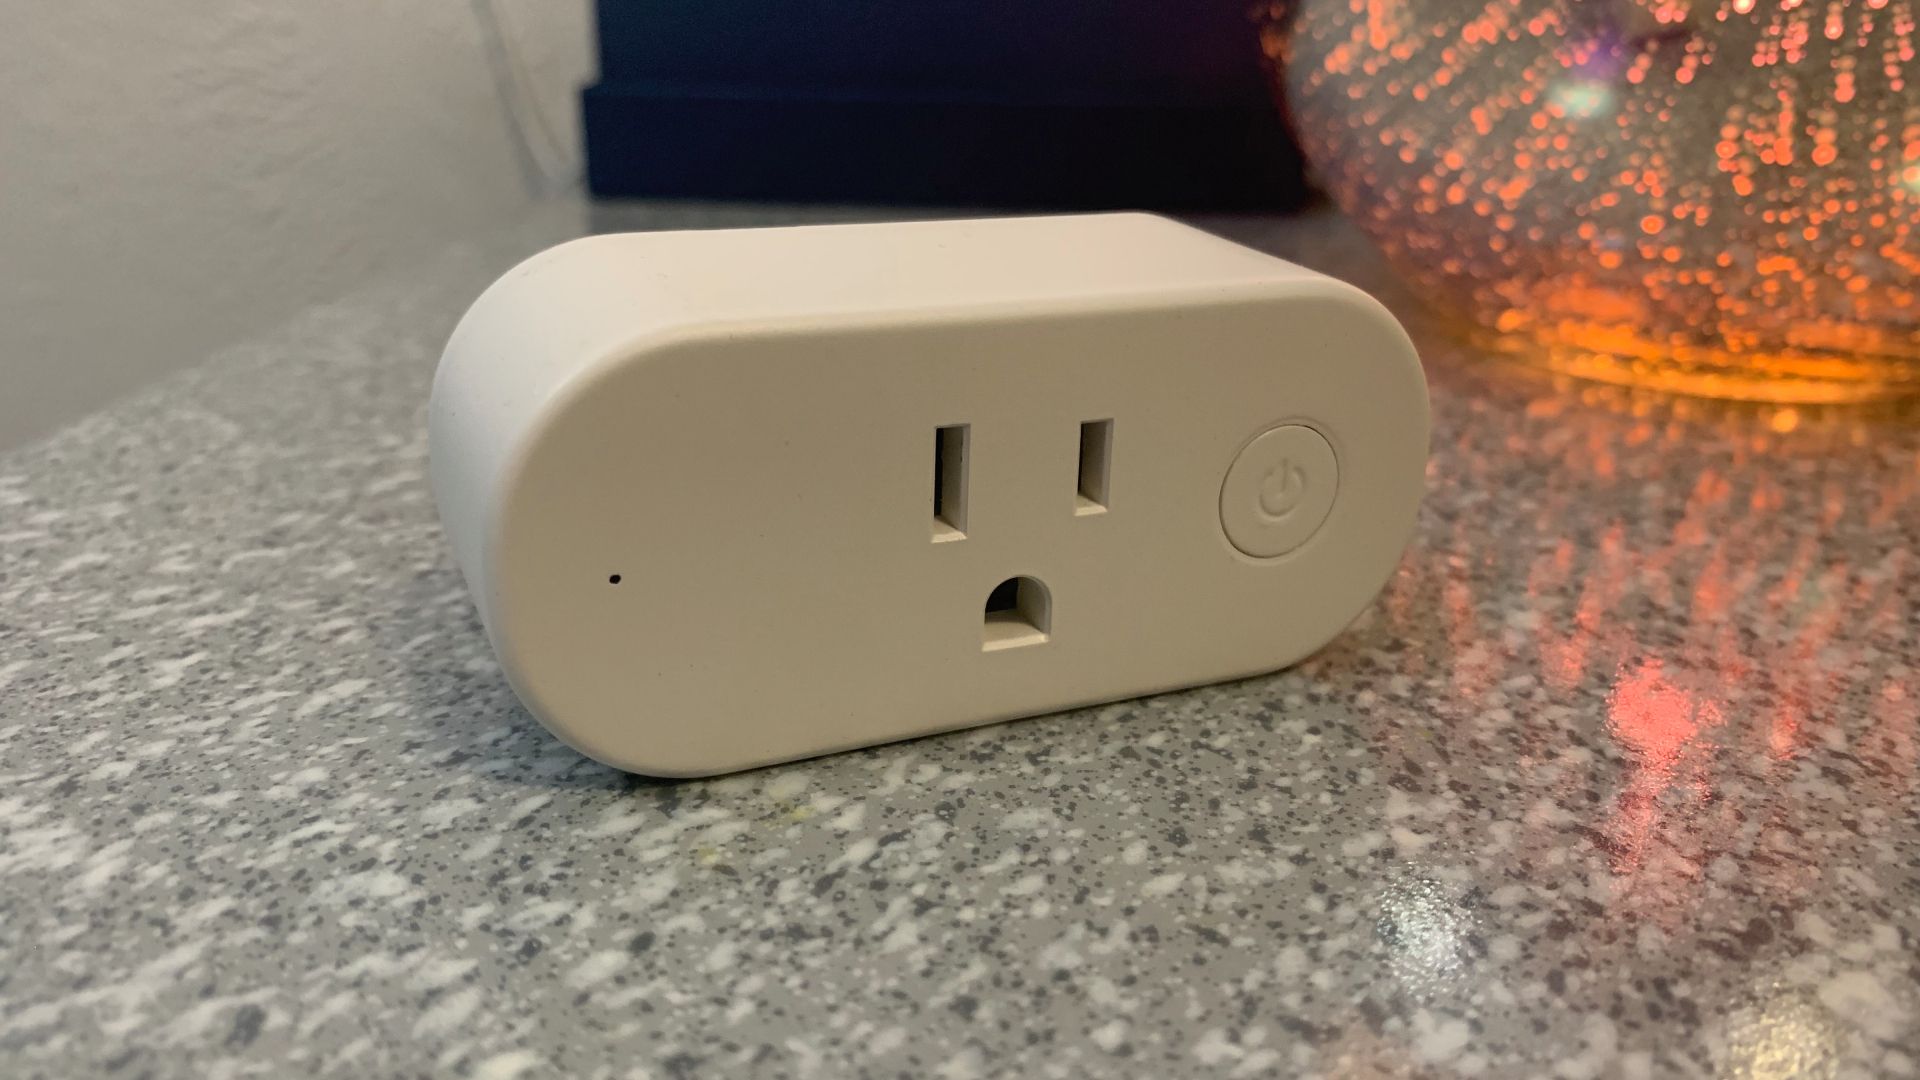 Shelly Plug US Review: A Small, Smart Investment